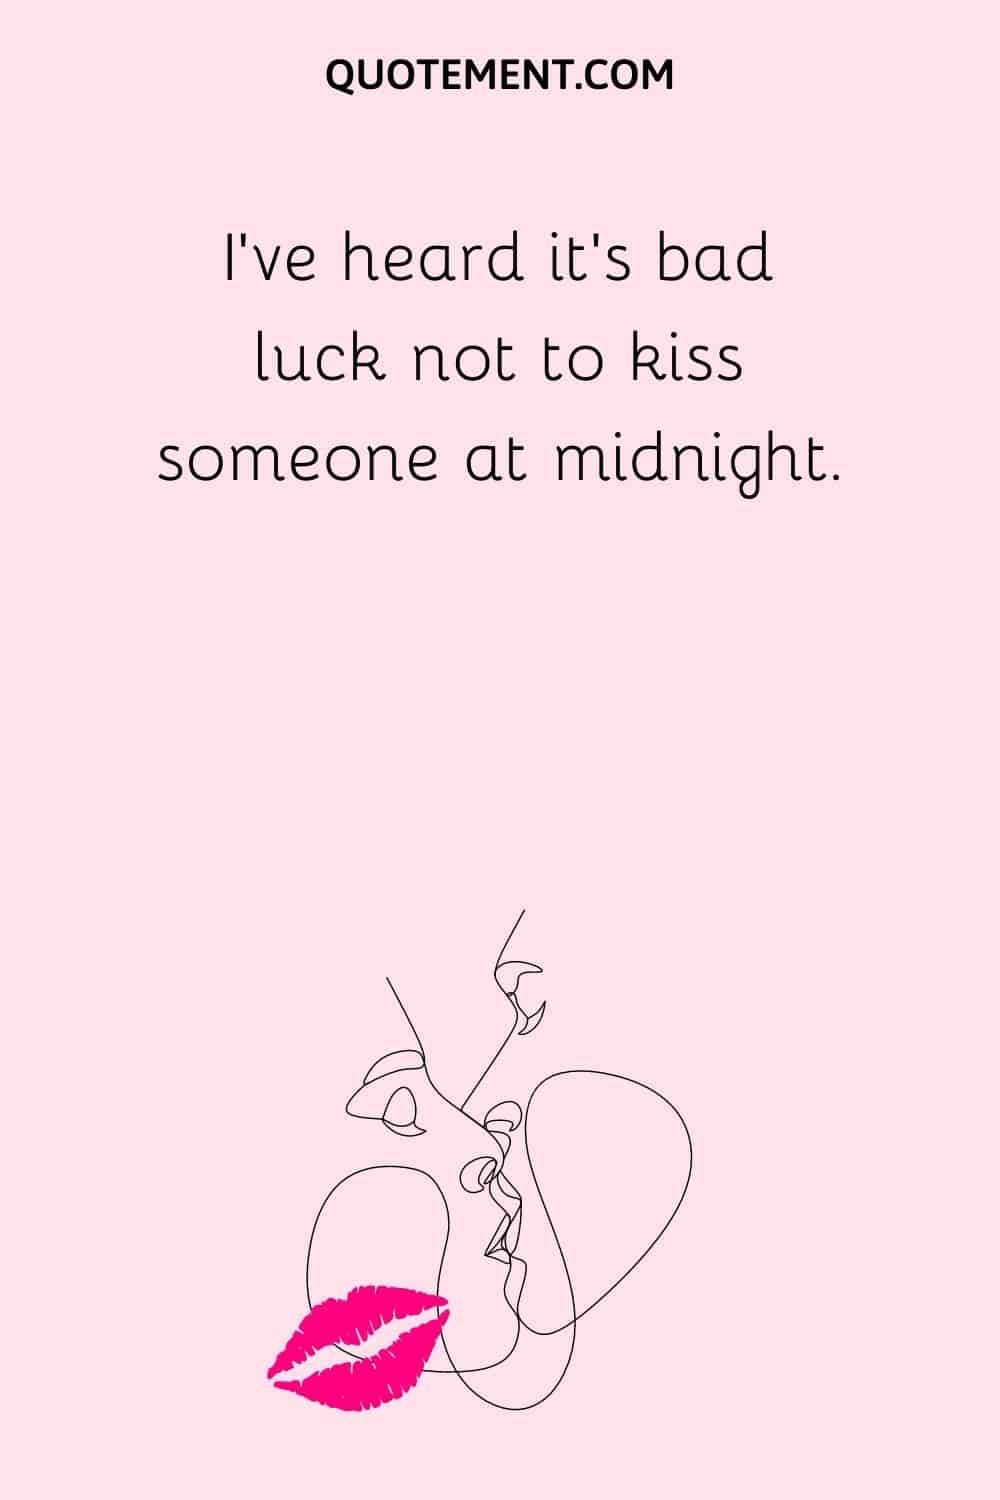 I’ve heard it’s bad luck not to kiss someone at midnight